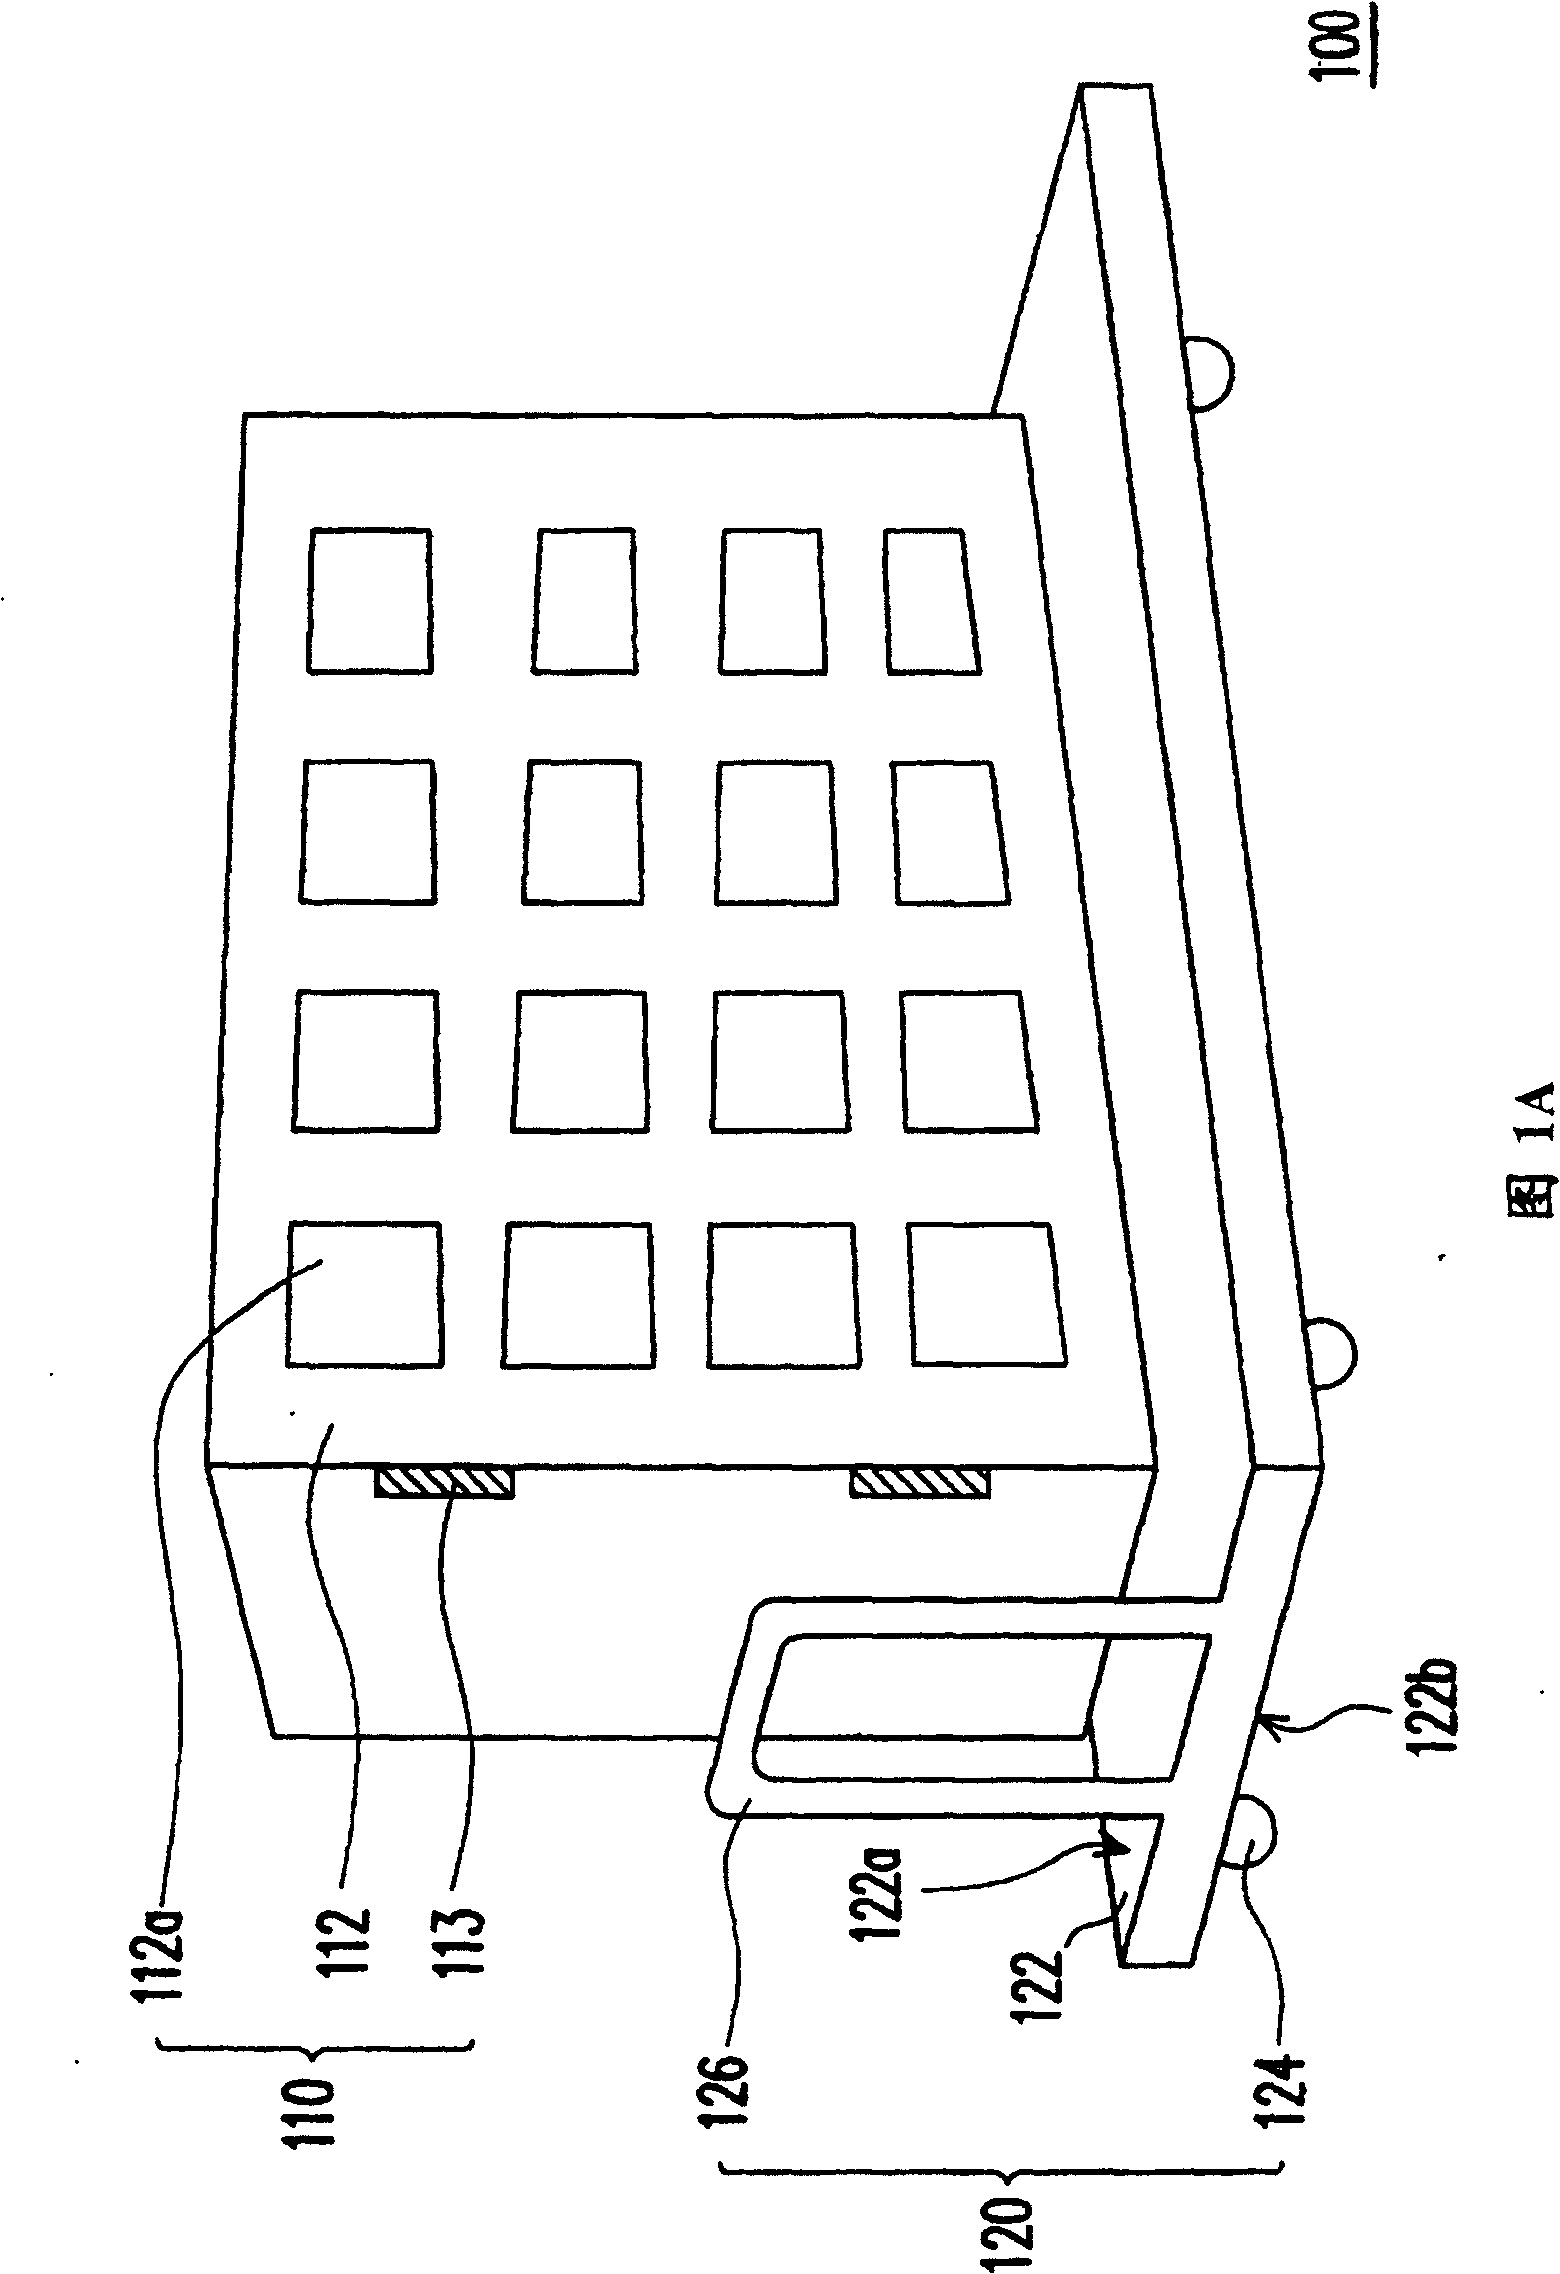 High temperature aging test device for display panel